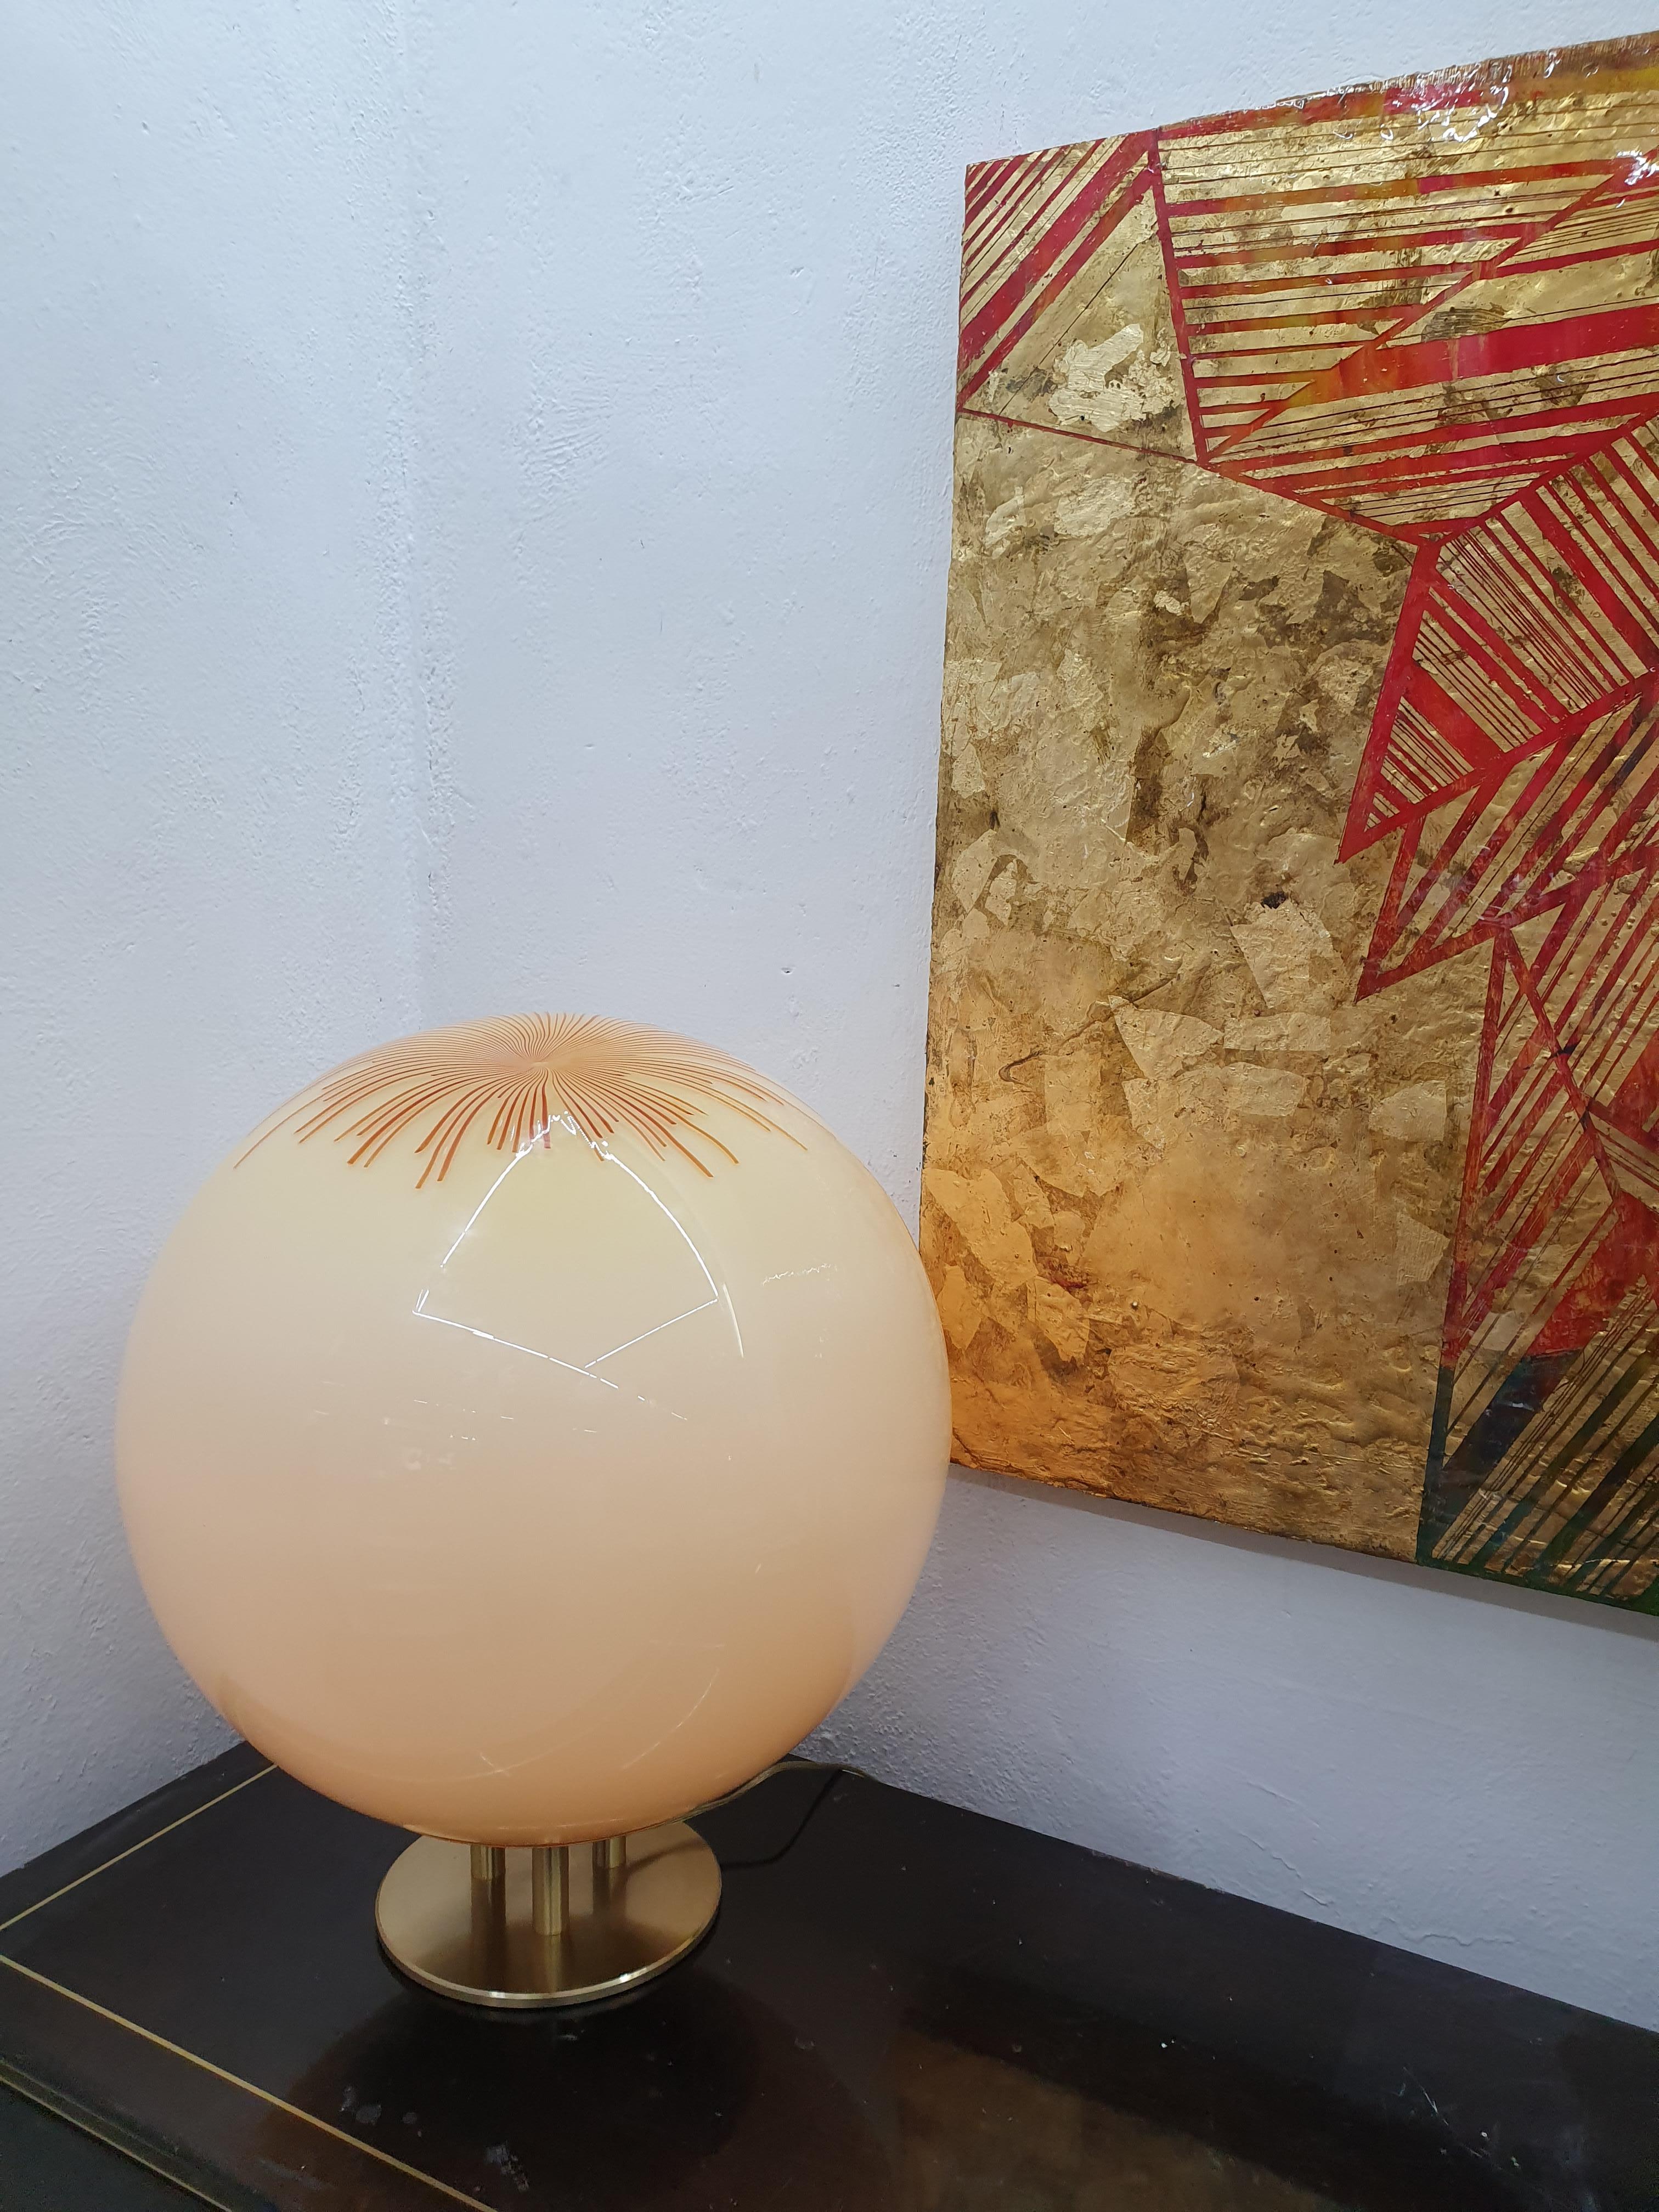 Mid-Century Modern table lamp with one light by La Murrina in Murano glass and brass hardware, this sphere is signed and the glass is attributed to Ludovico Diaz Santillana's 